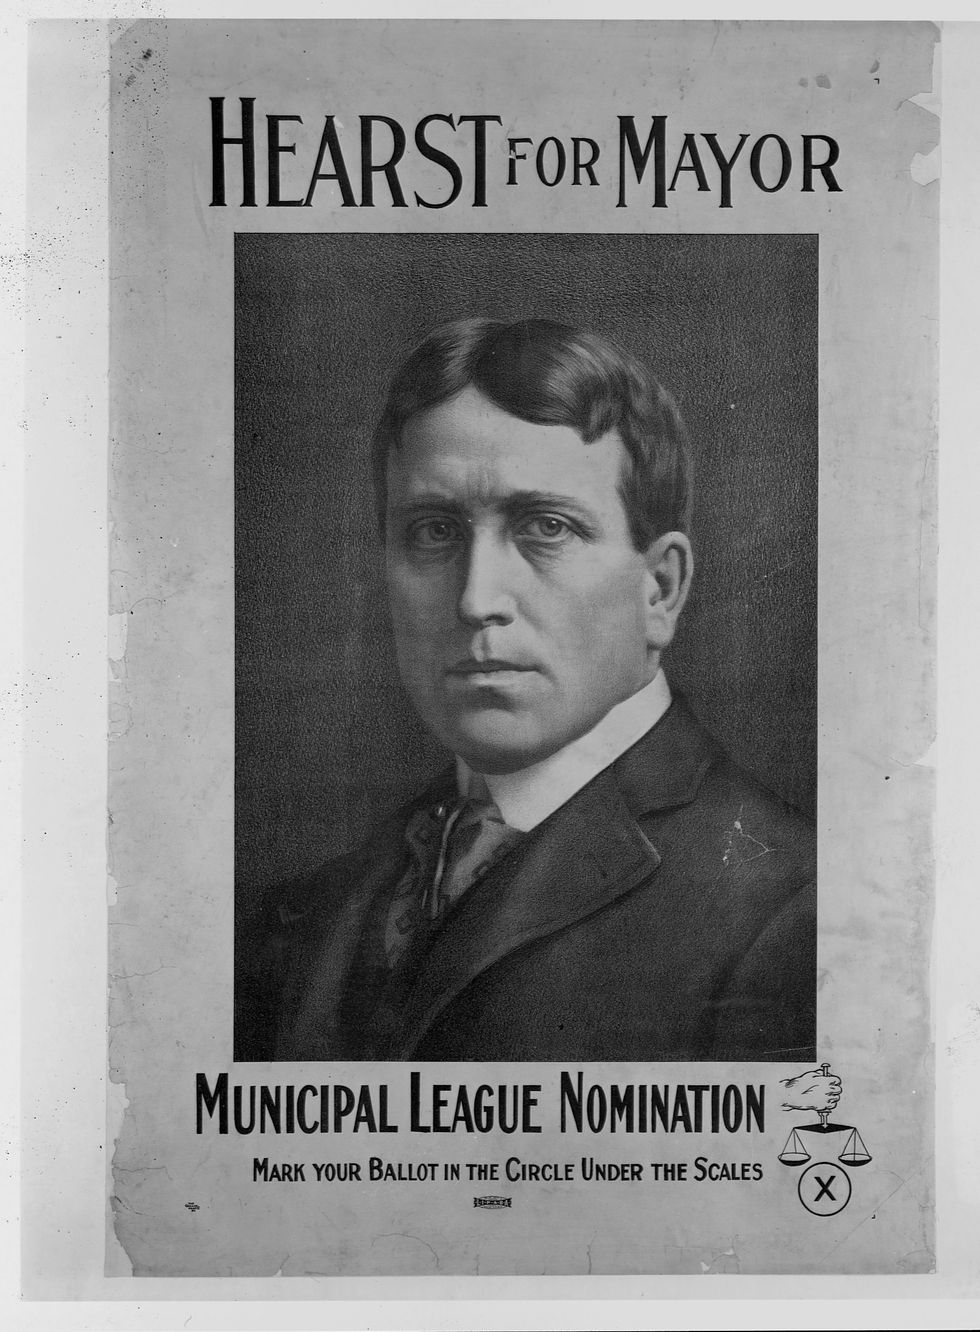 hearst for mayor campaign poster   photo by library of congresscorbisvcg via getty images